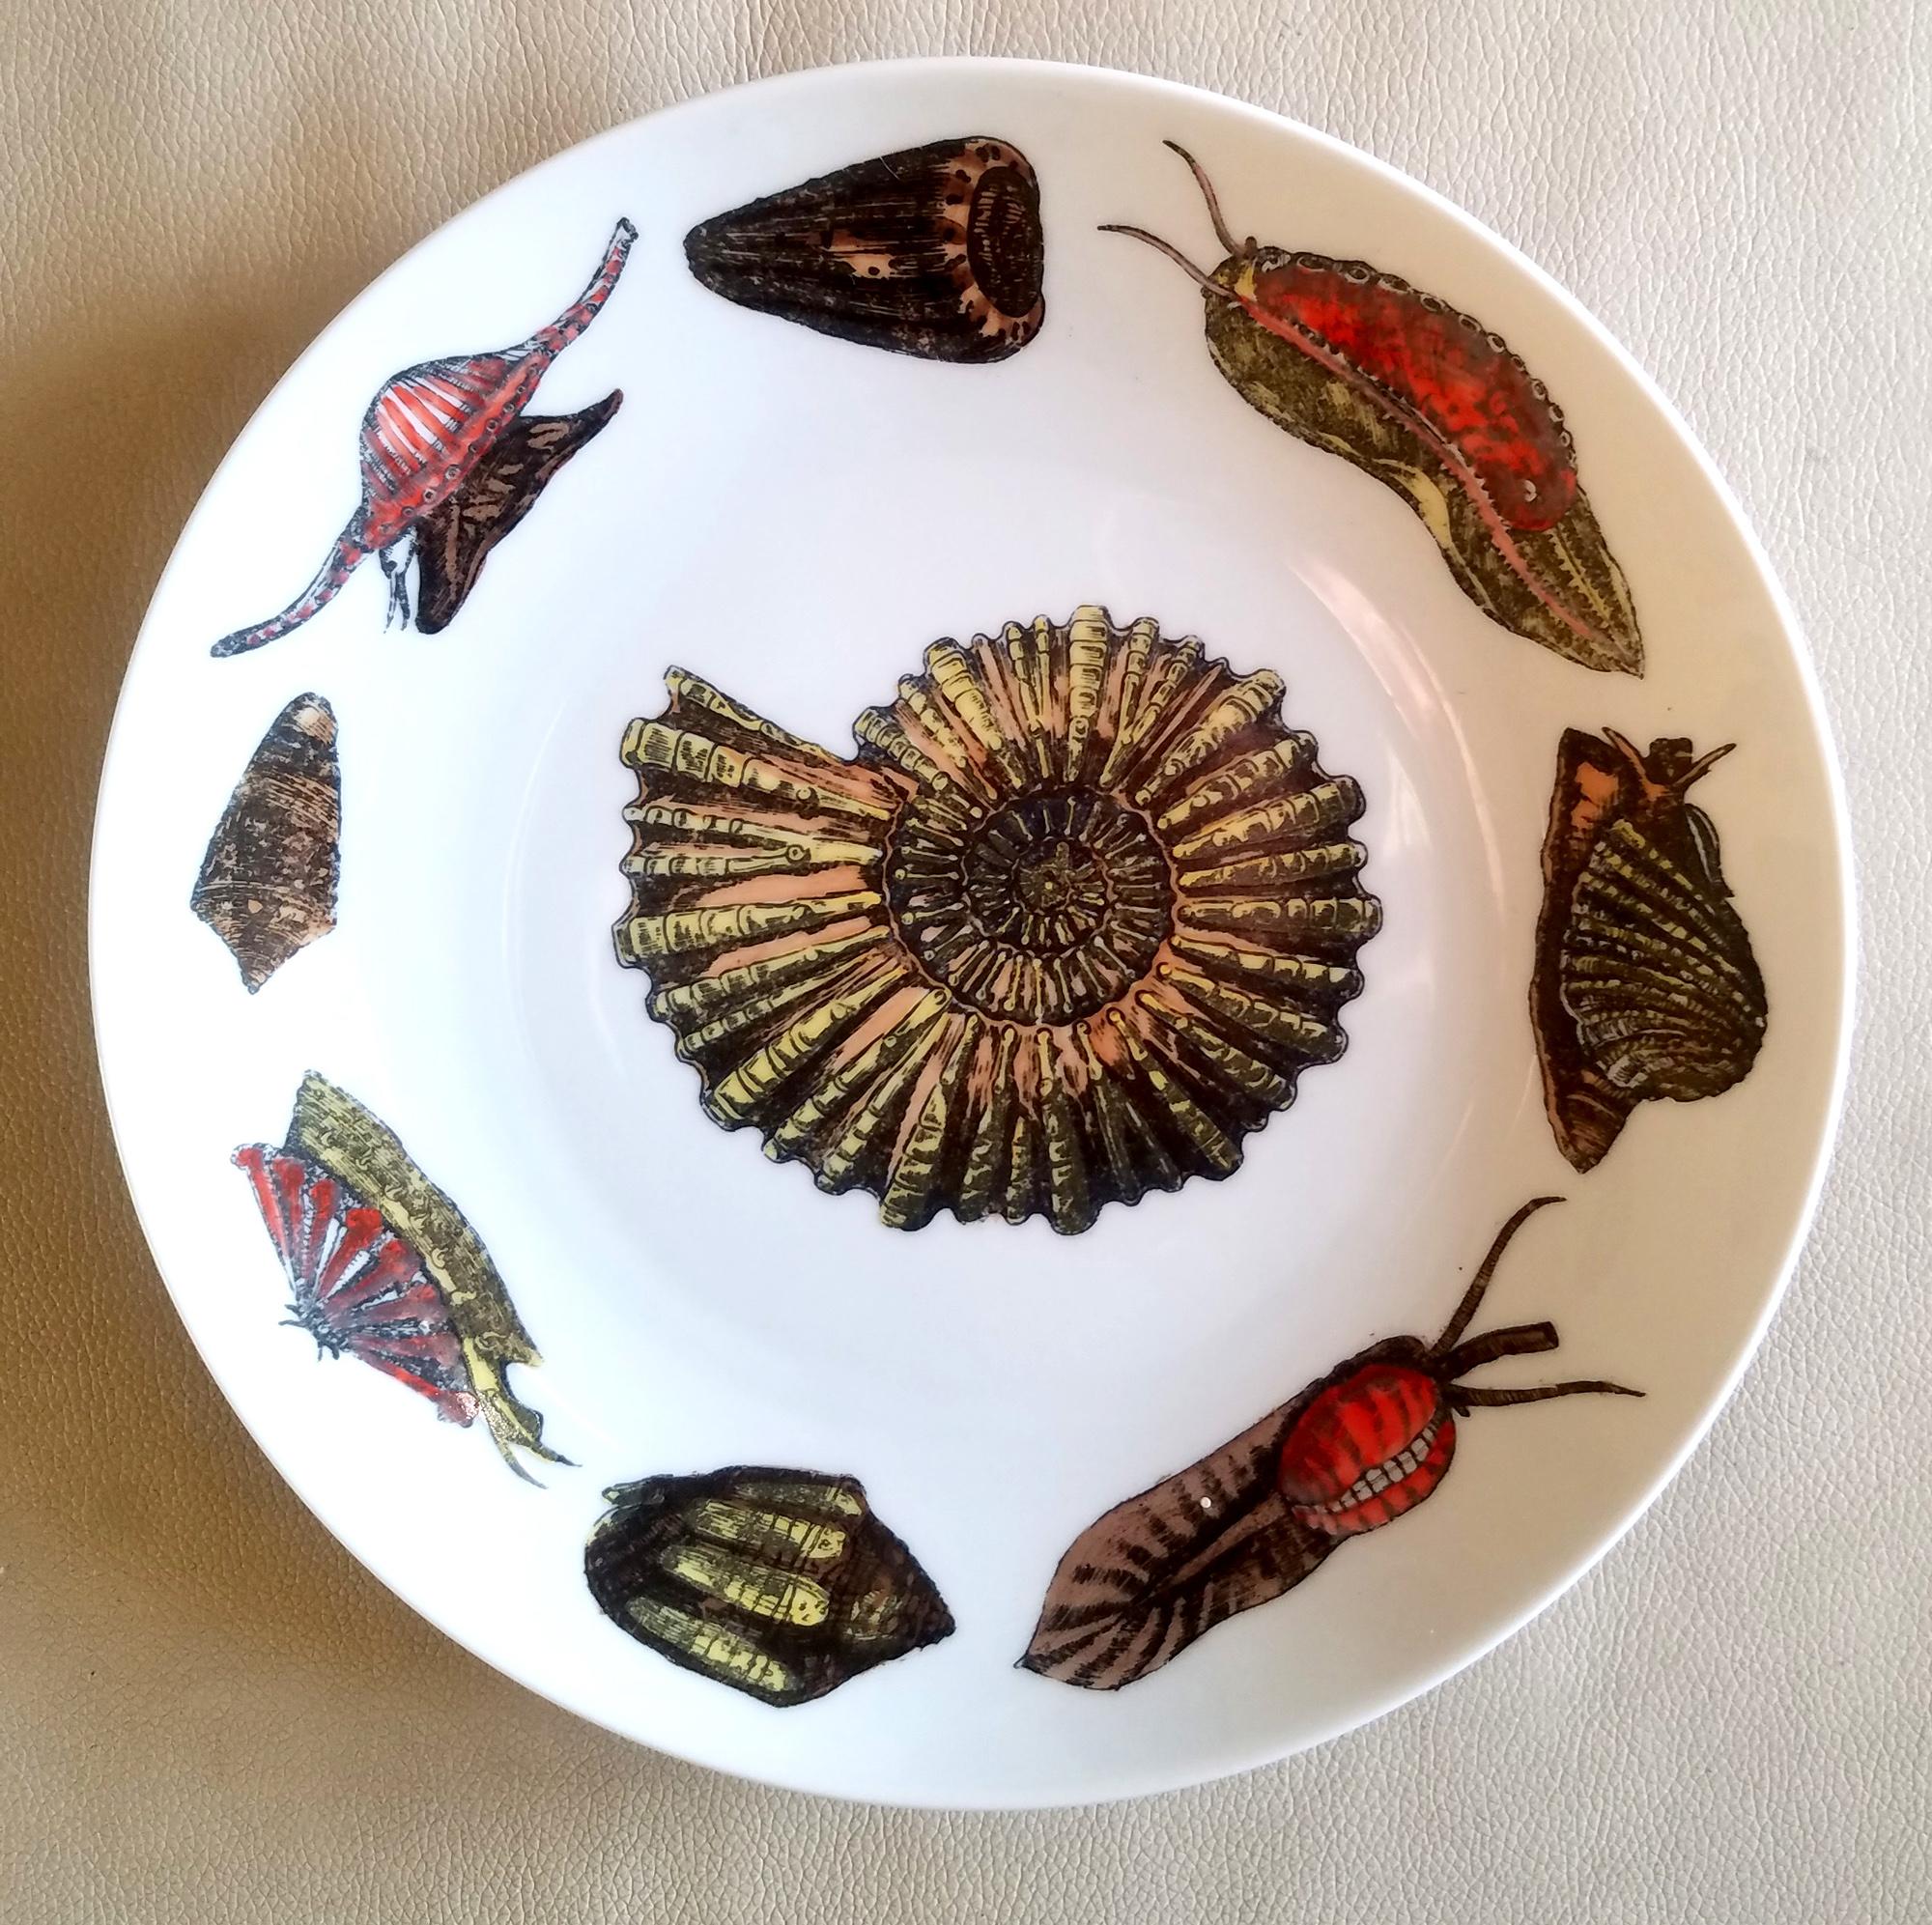 Piero Fornasetti Porcelain Conchiglie Seashell Set of Plates with Mollusks For Sale 6